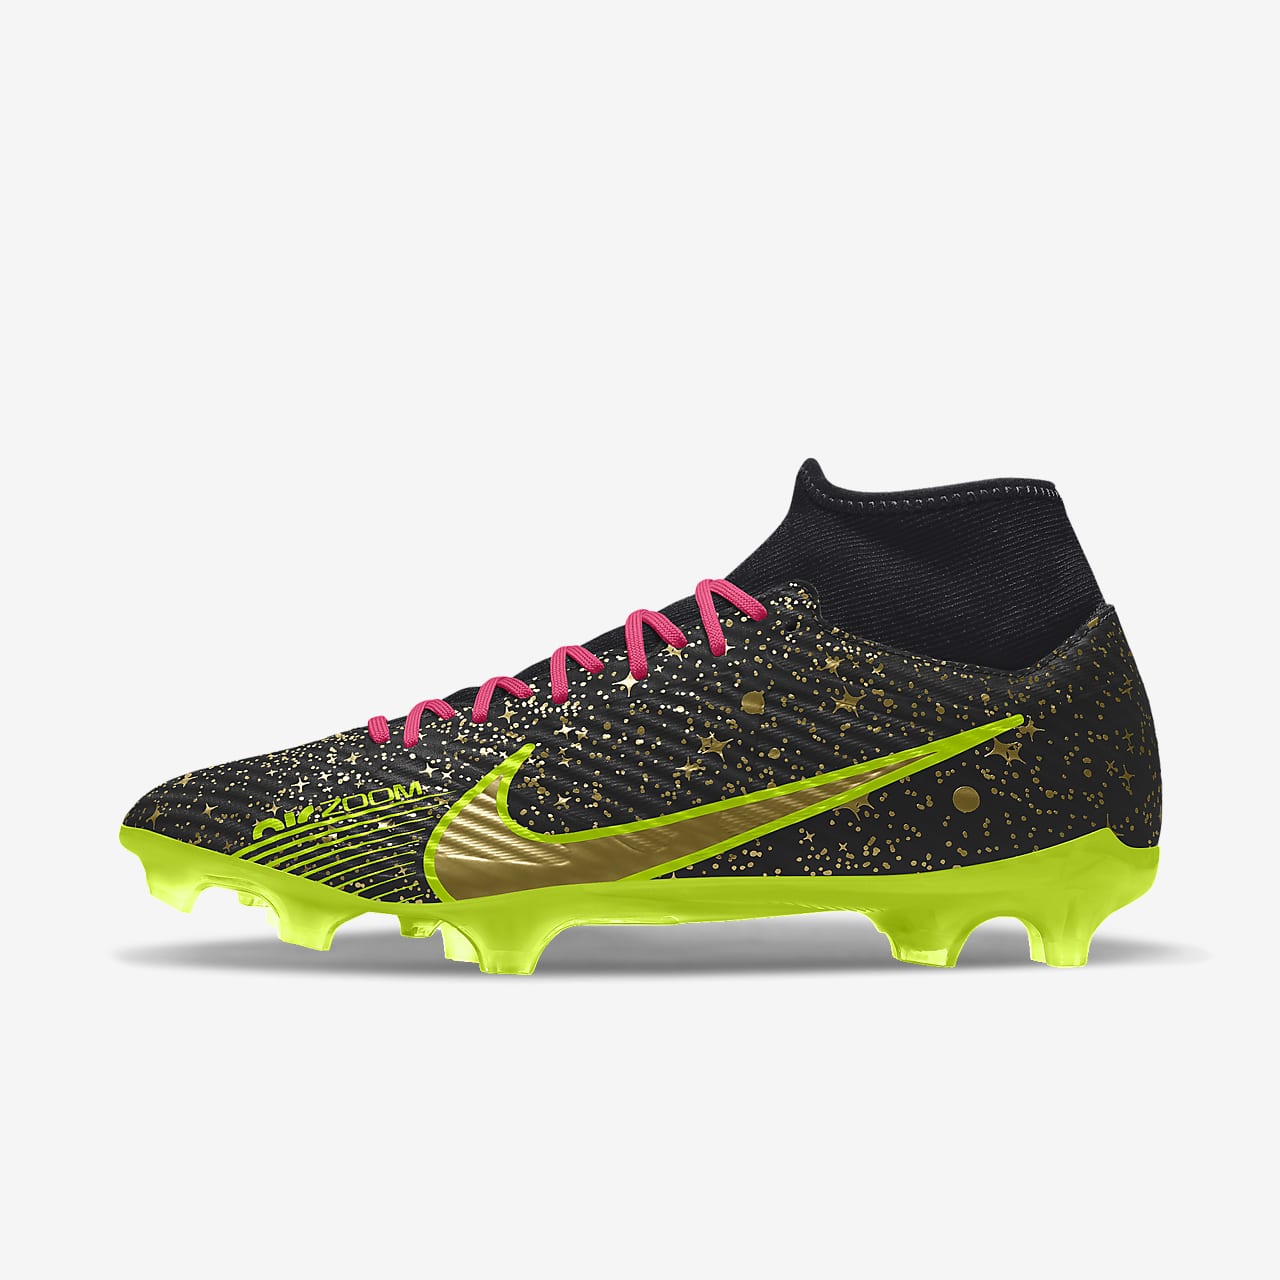 Chaussure de football à crampons pour terrain sec personnalisable Nike Zoom Mercurial Superfly 9 Academy FG By You